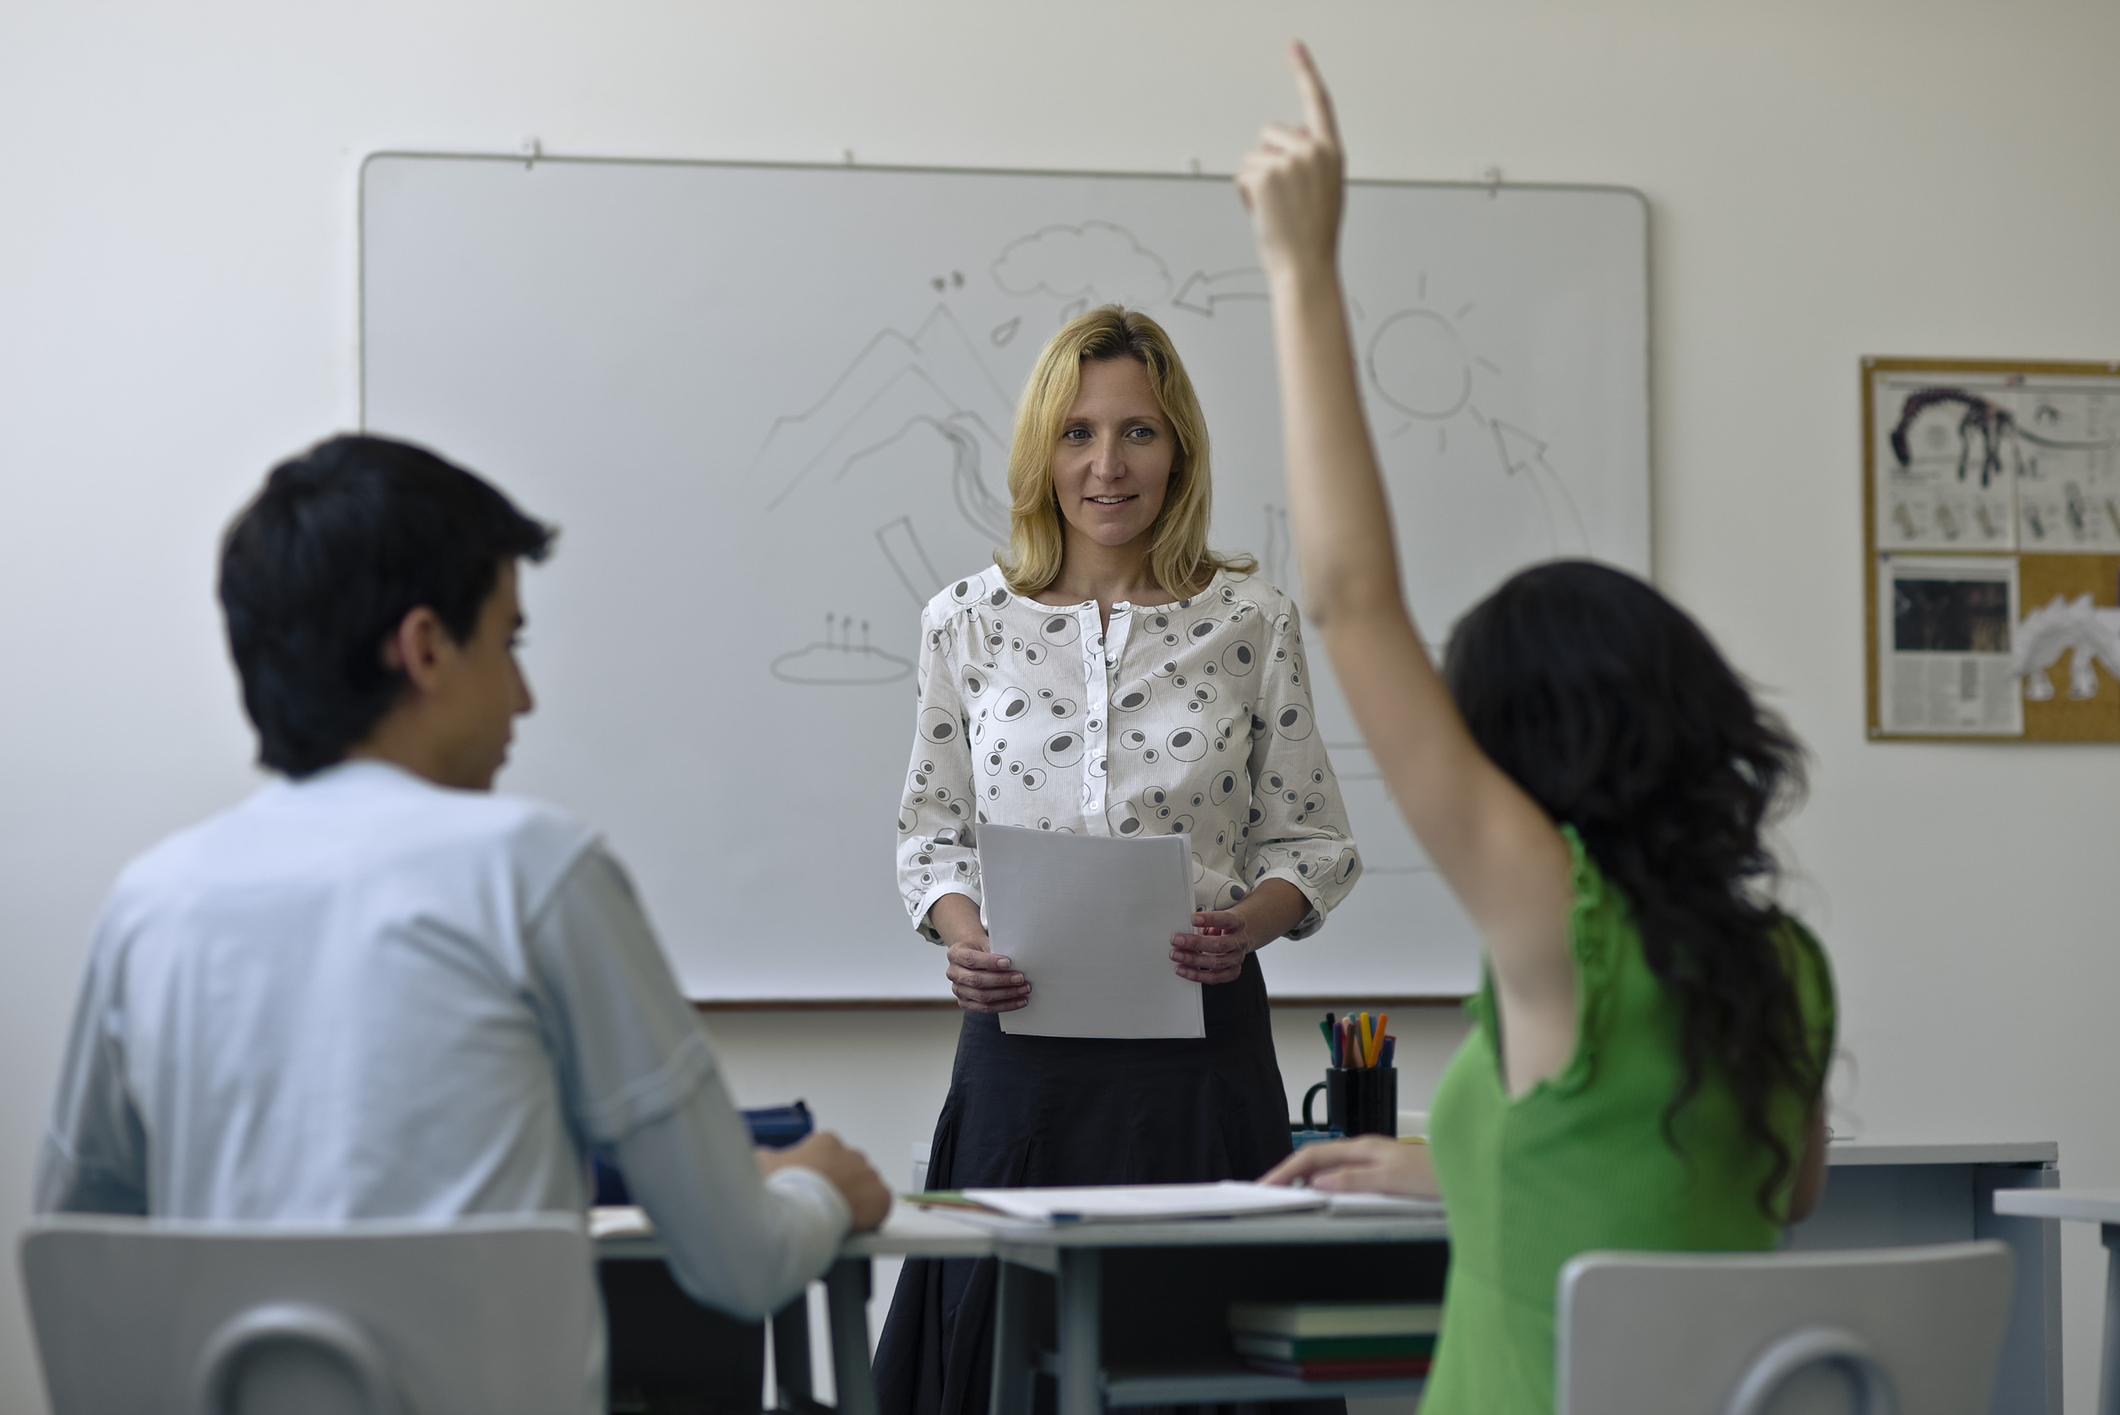 High school teacher in classroom, one student raising hand. (Getty Images)